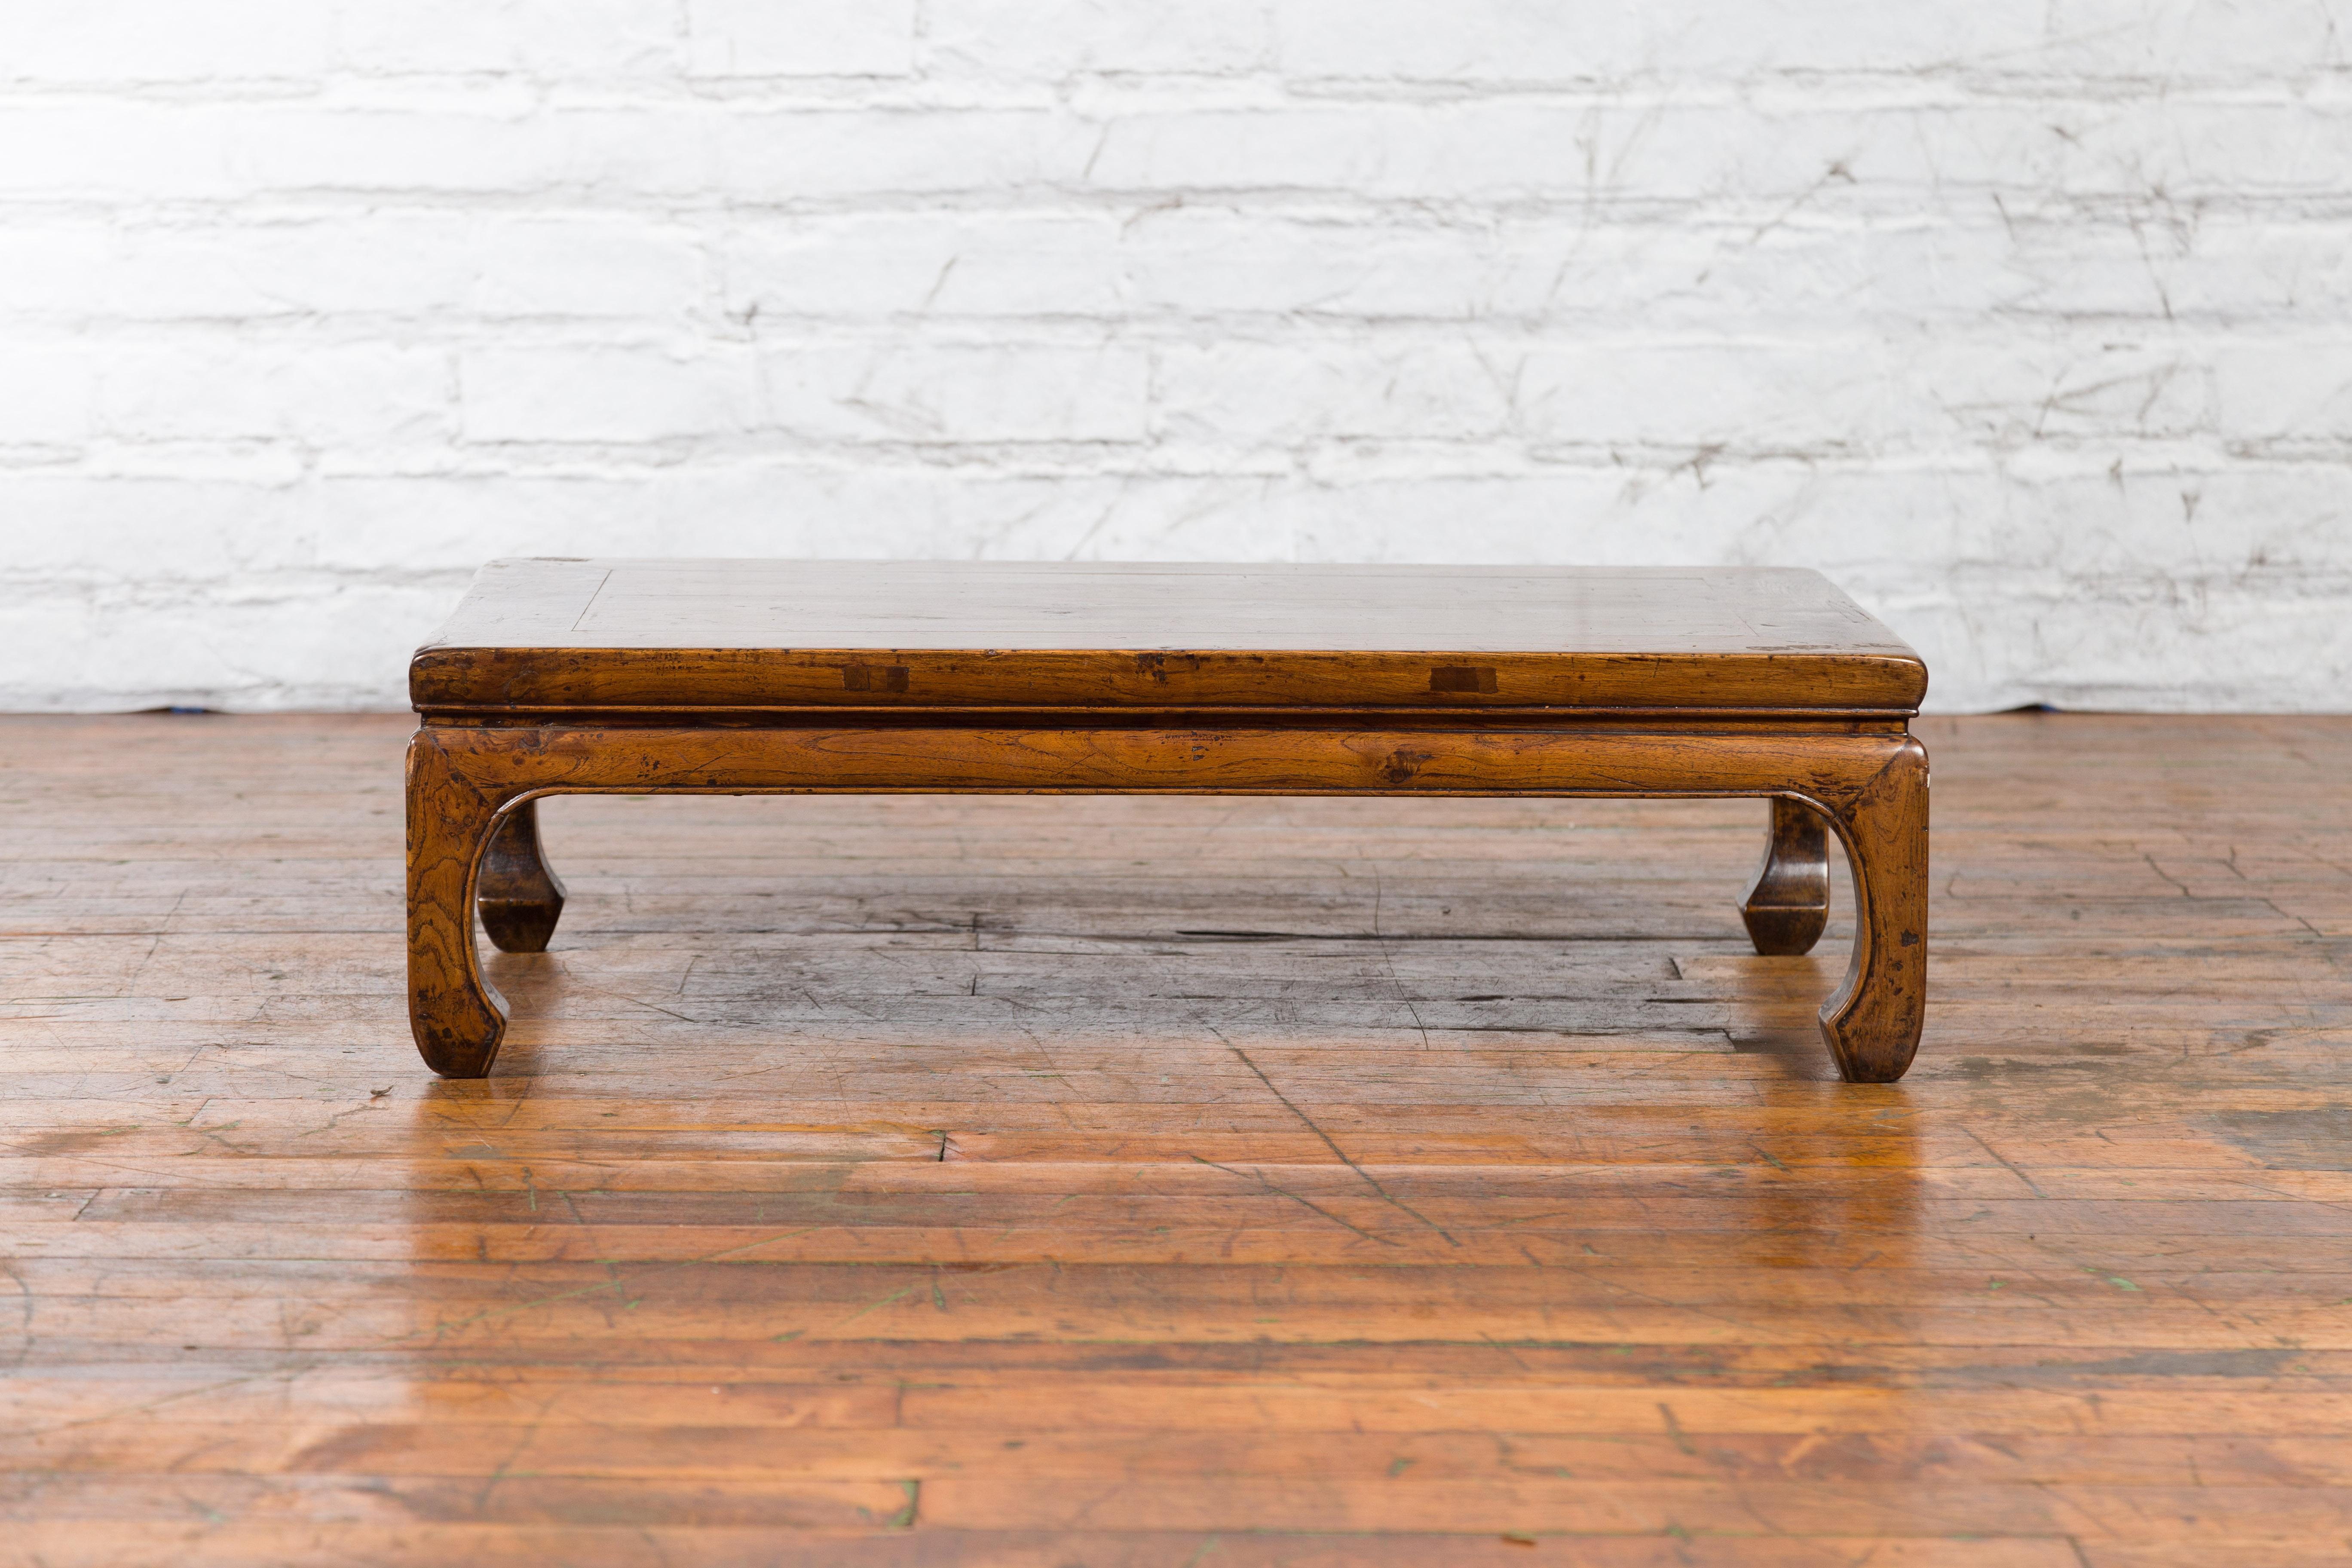 Chinese 19th Century Qing Dynasty Elm Kang Coffee Table with Horse Hoof Legs 4